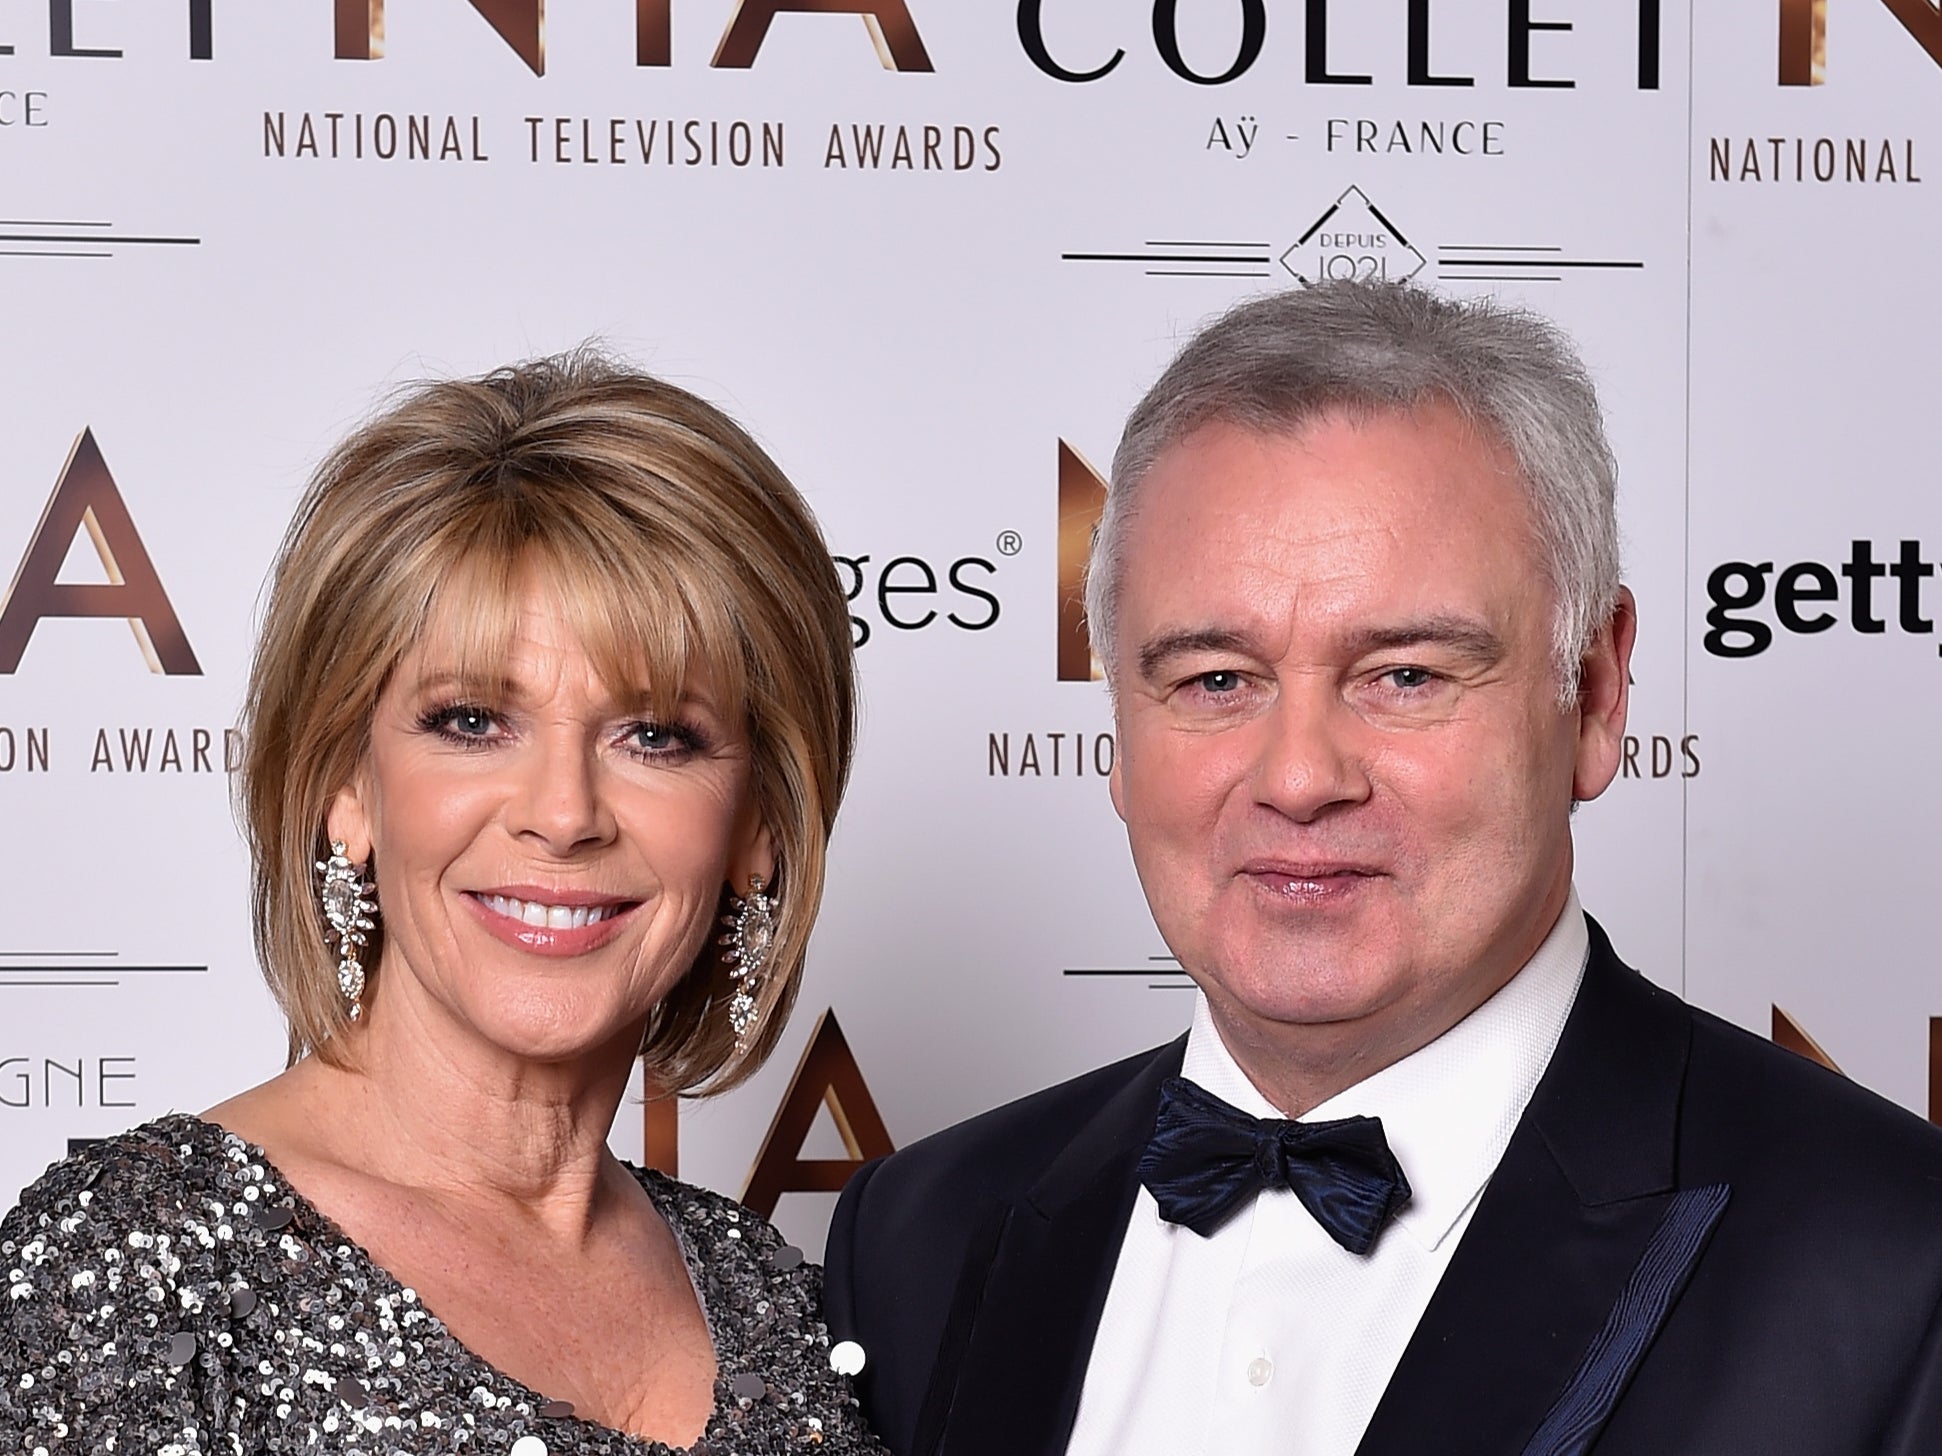 Ruth Langsford and Eamonn Holmes are hoping to remain friends